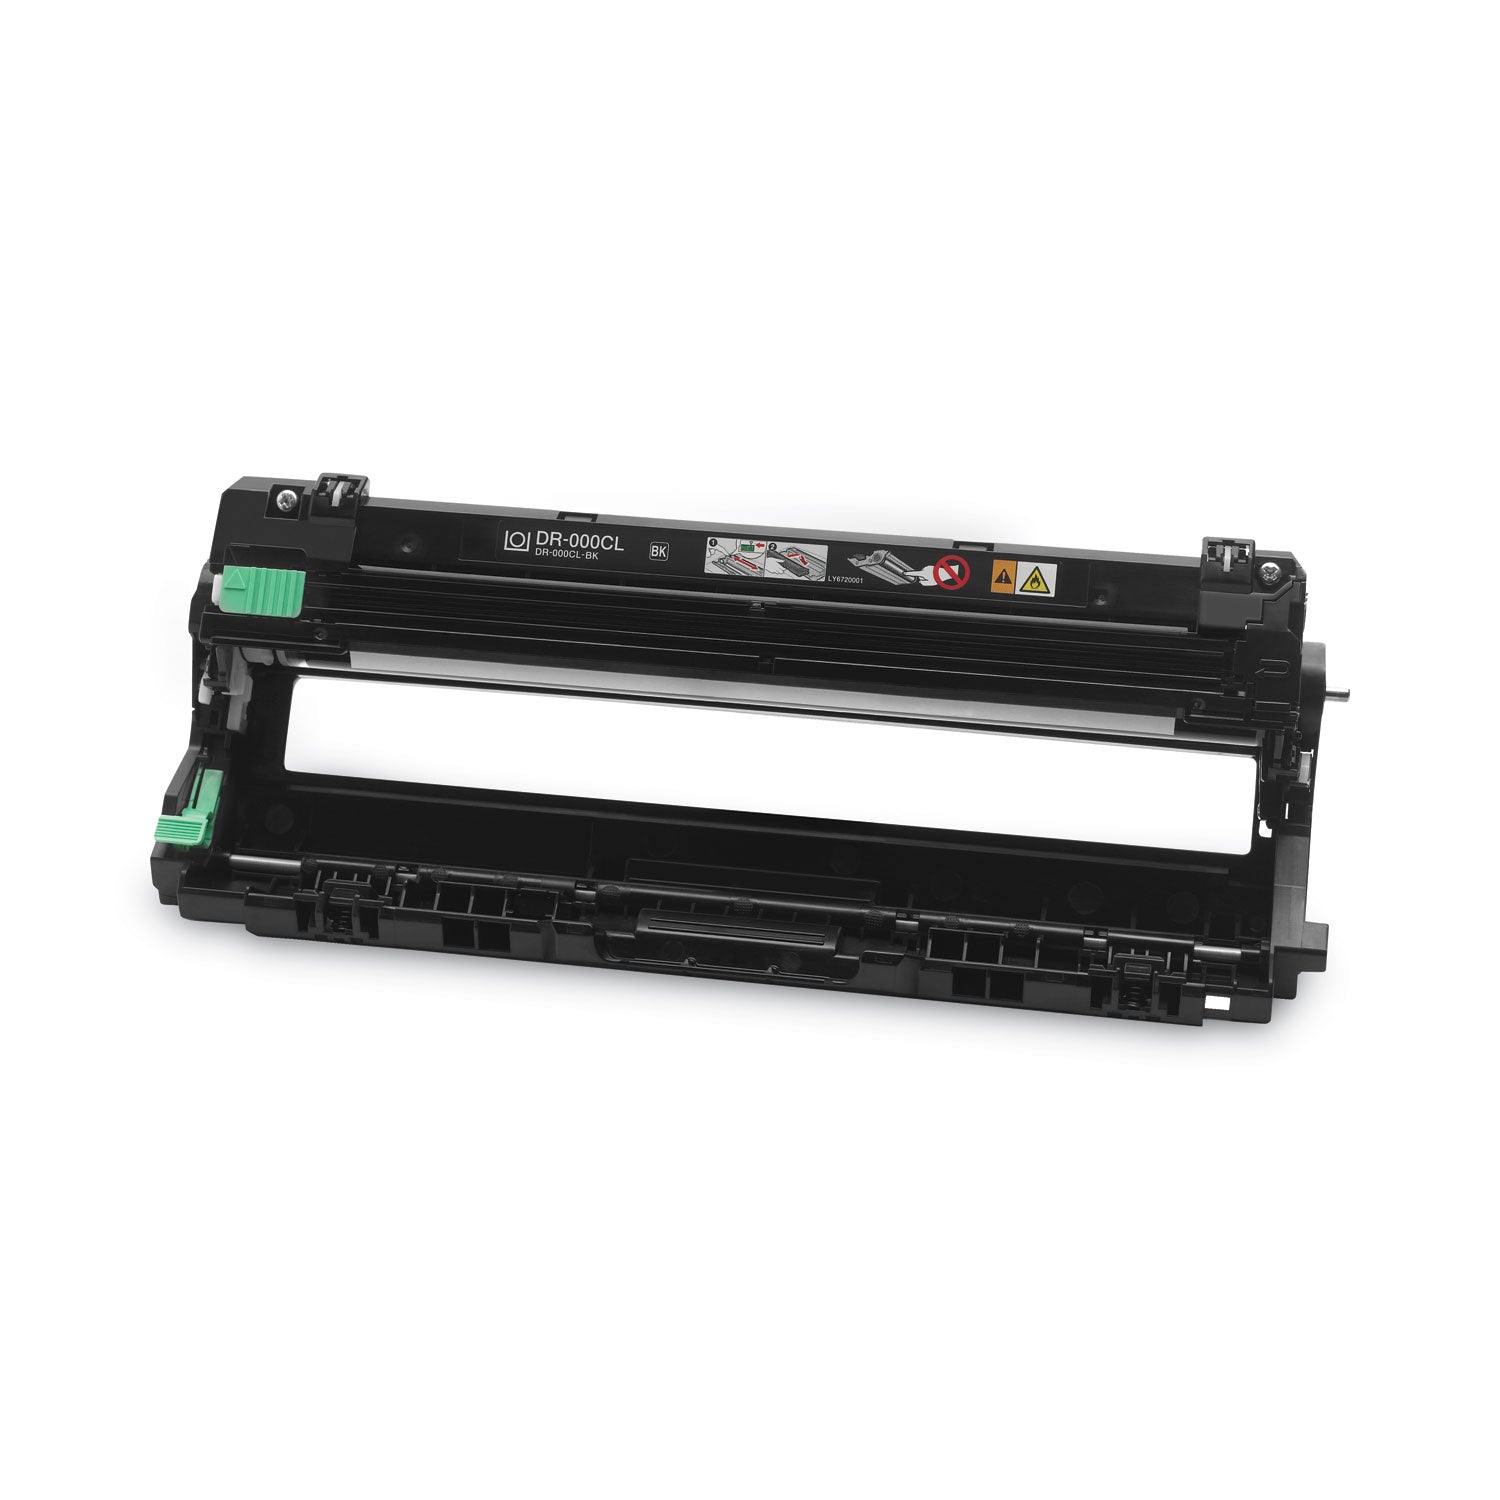 dr221cl-drum-unit-15000-page-yield-black-cyan-magenta-yellow_brtdr221cl - 3